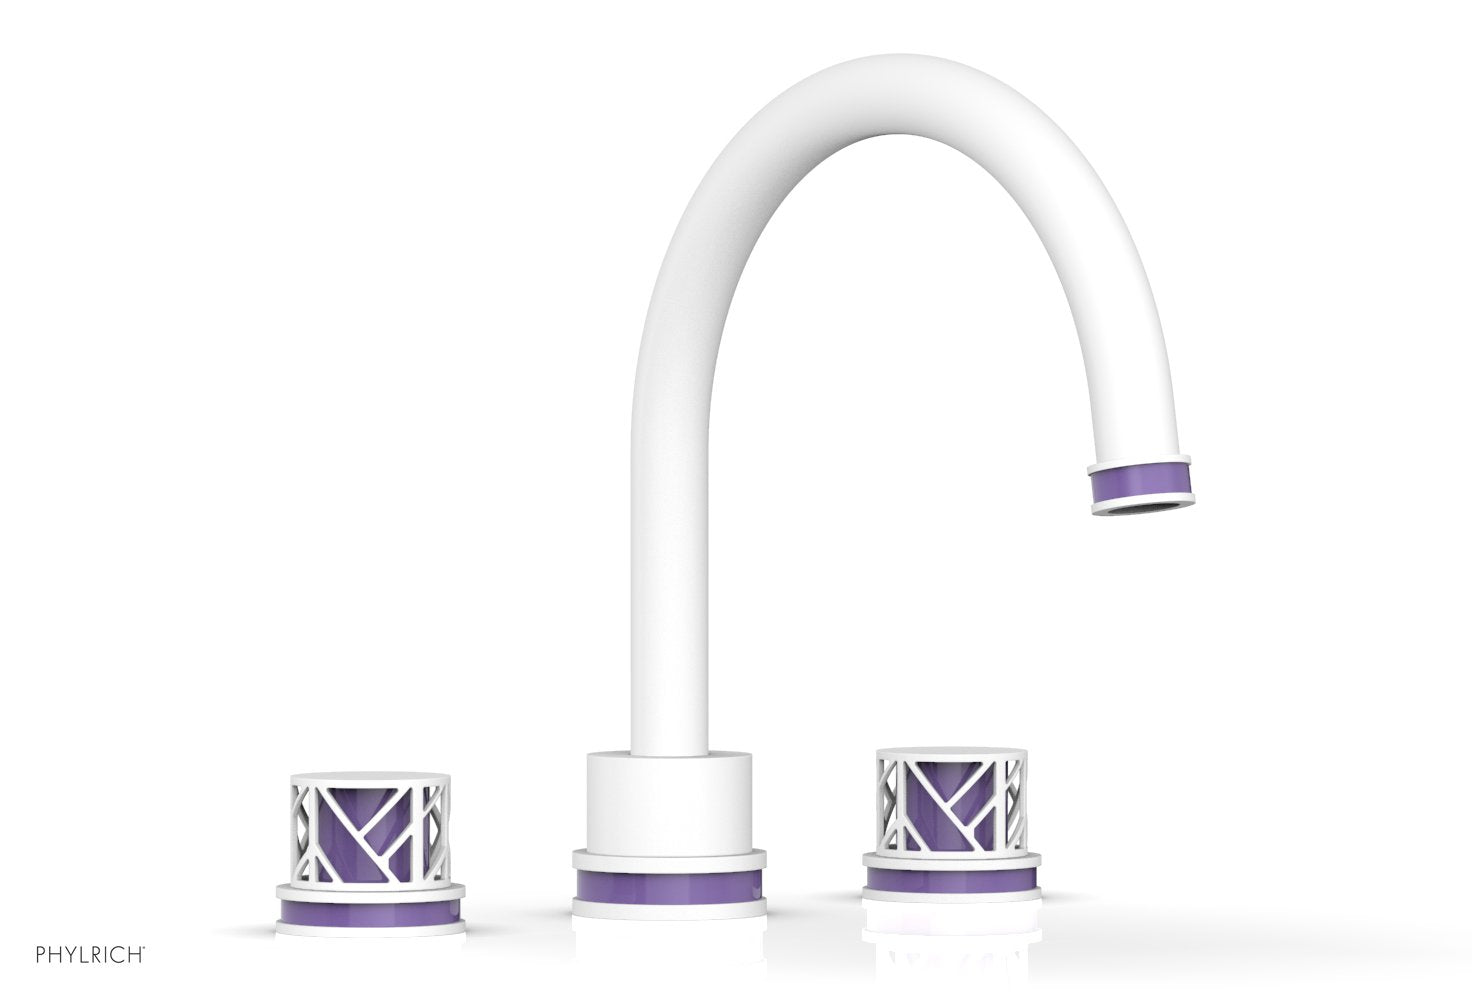 Phylrich JOLIE Deck Tub Set - Round Handles with "Purple" Accents